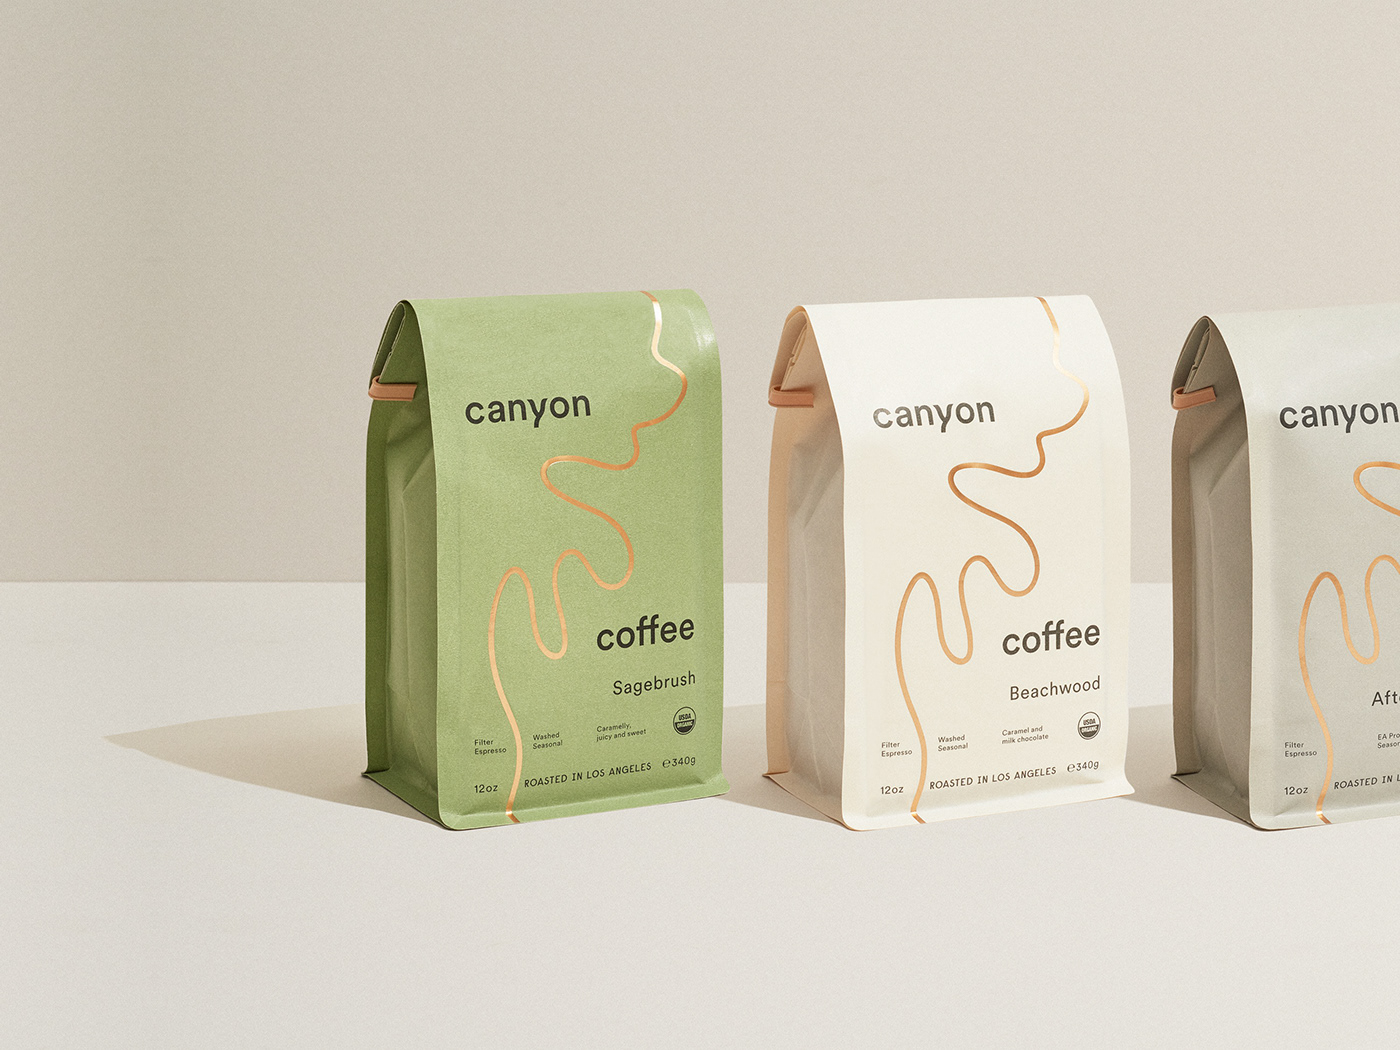 Canyon Coffee introduces beautiful new packaging for their 12oz bags by STUDIO L'AMI.